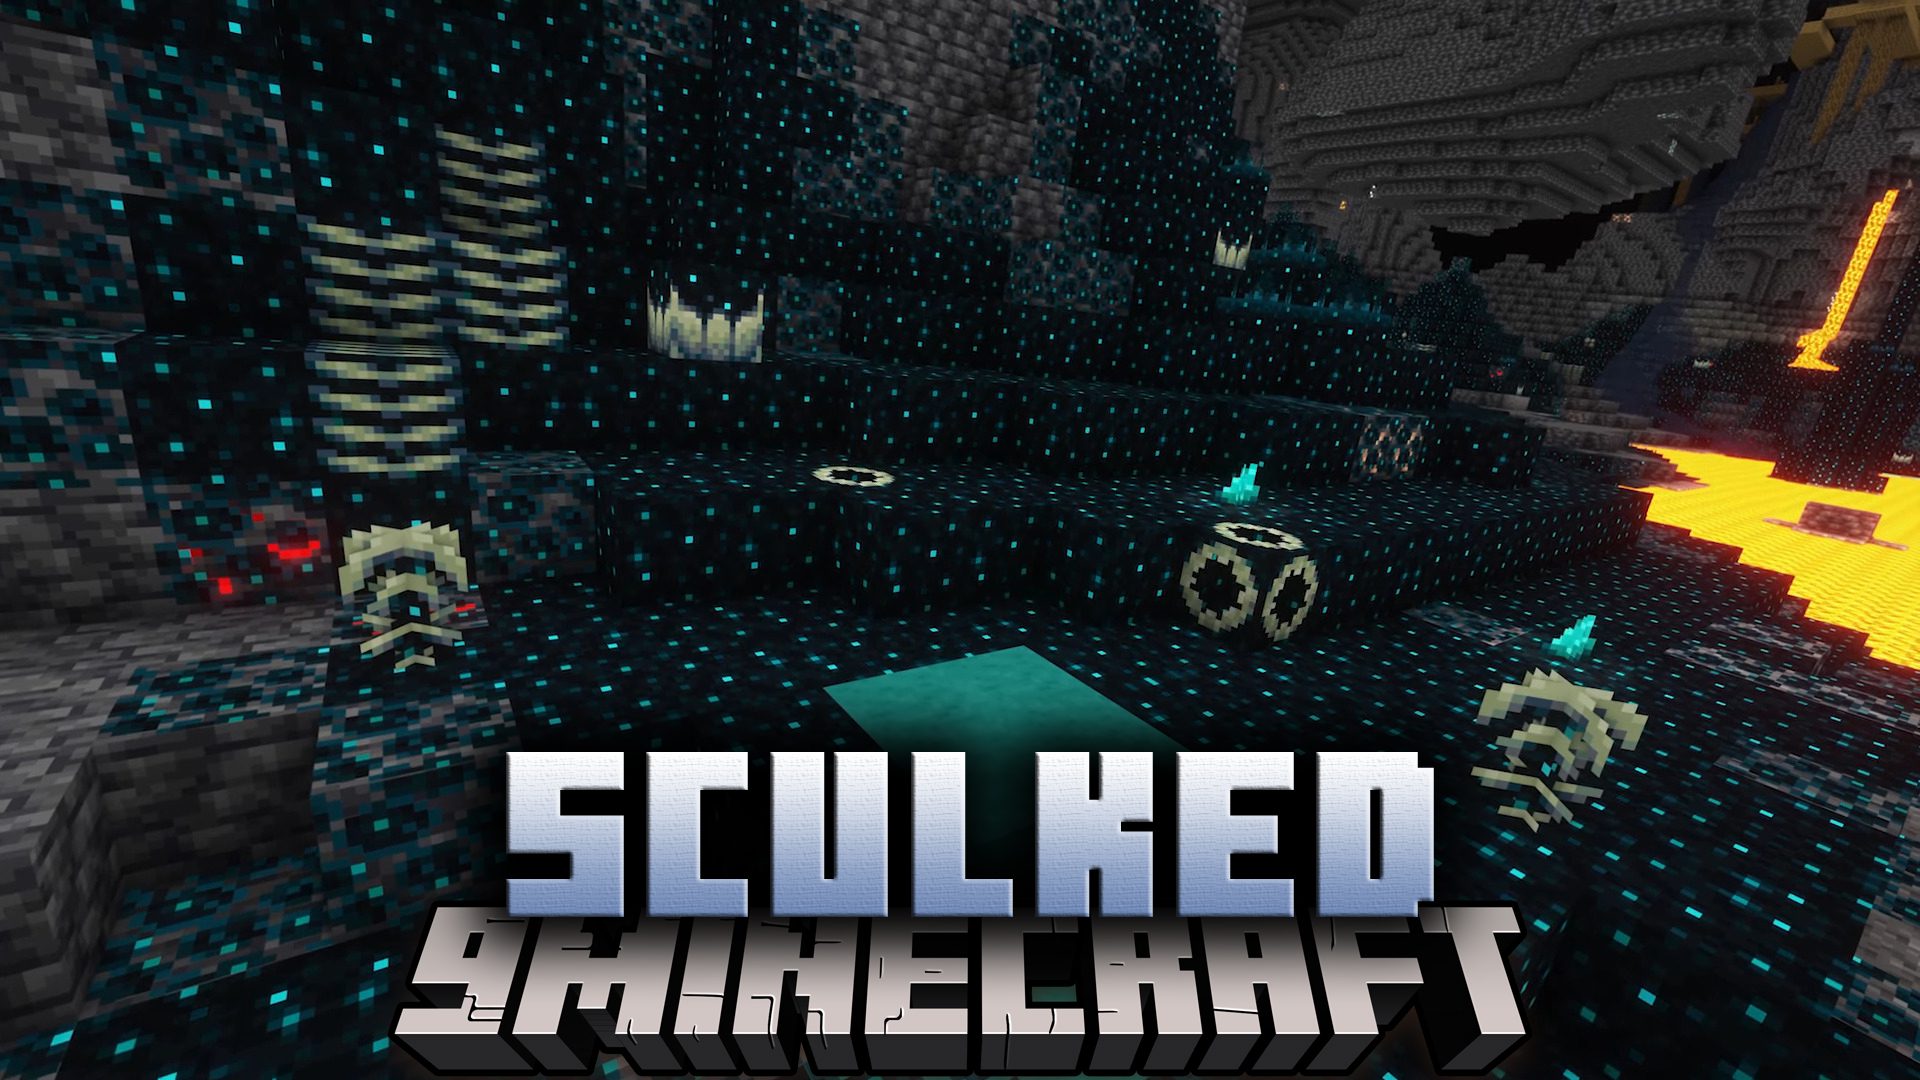 Sculked Mod (1.19.2) - Making The Deep Dark Come Alive.